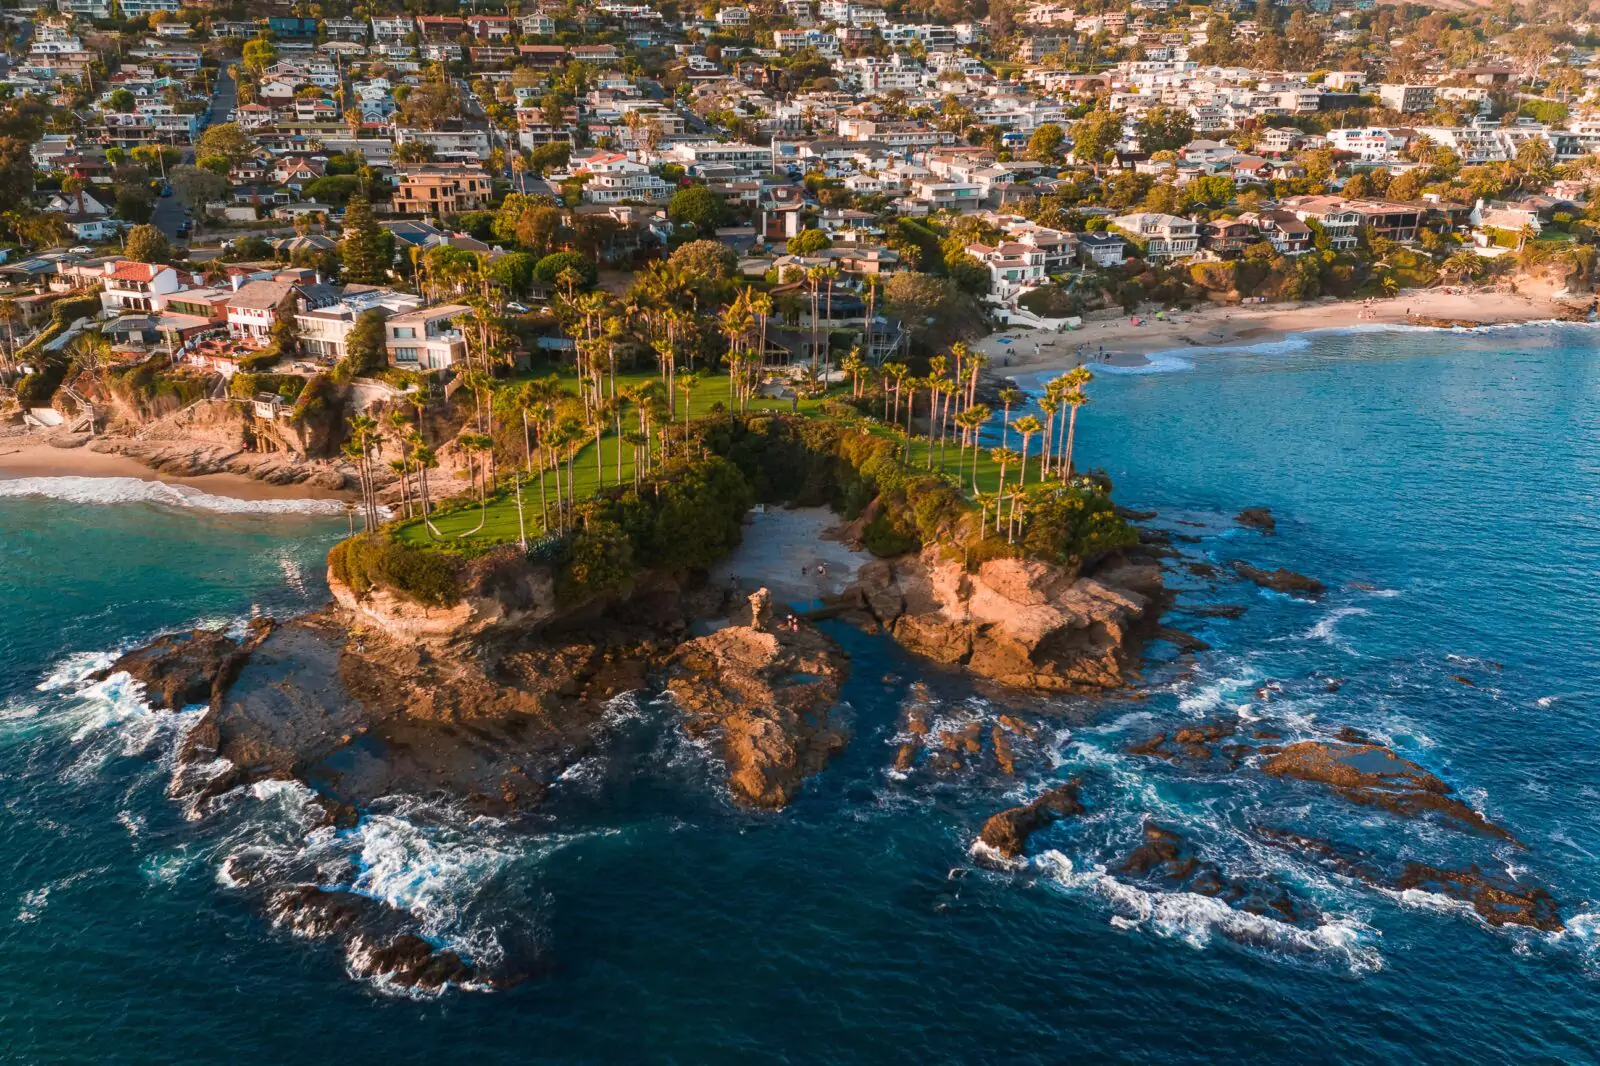 Drone photo of Shaw's Cove in Laguna Beach with luxury homes in the background as sold by Realtor Stavros Group